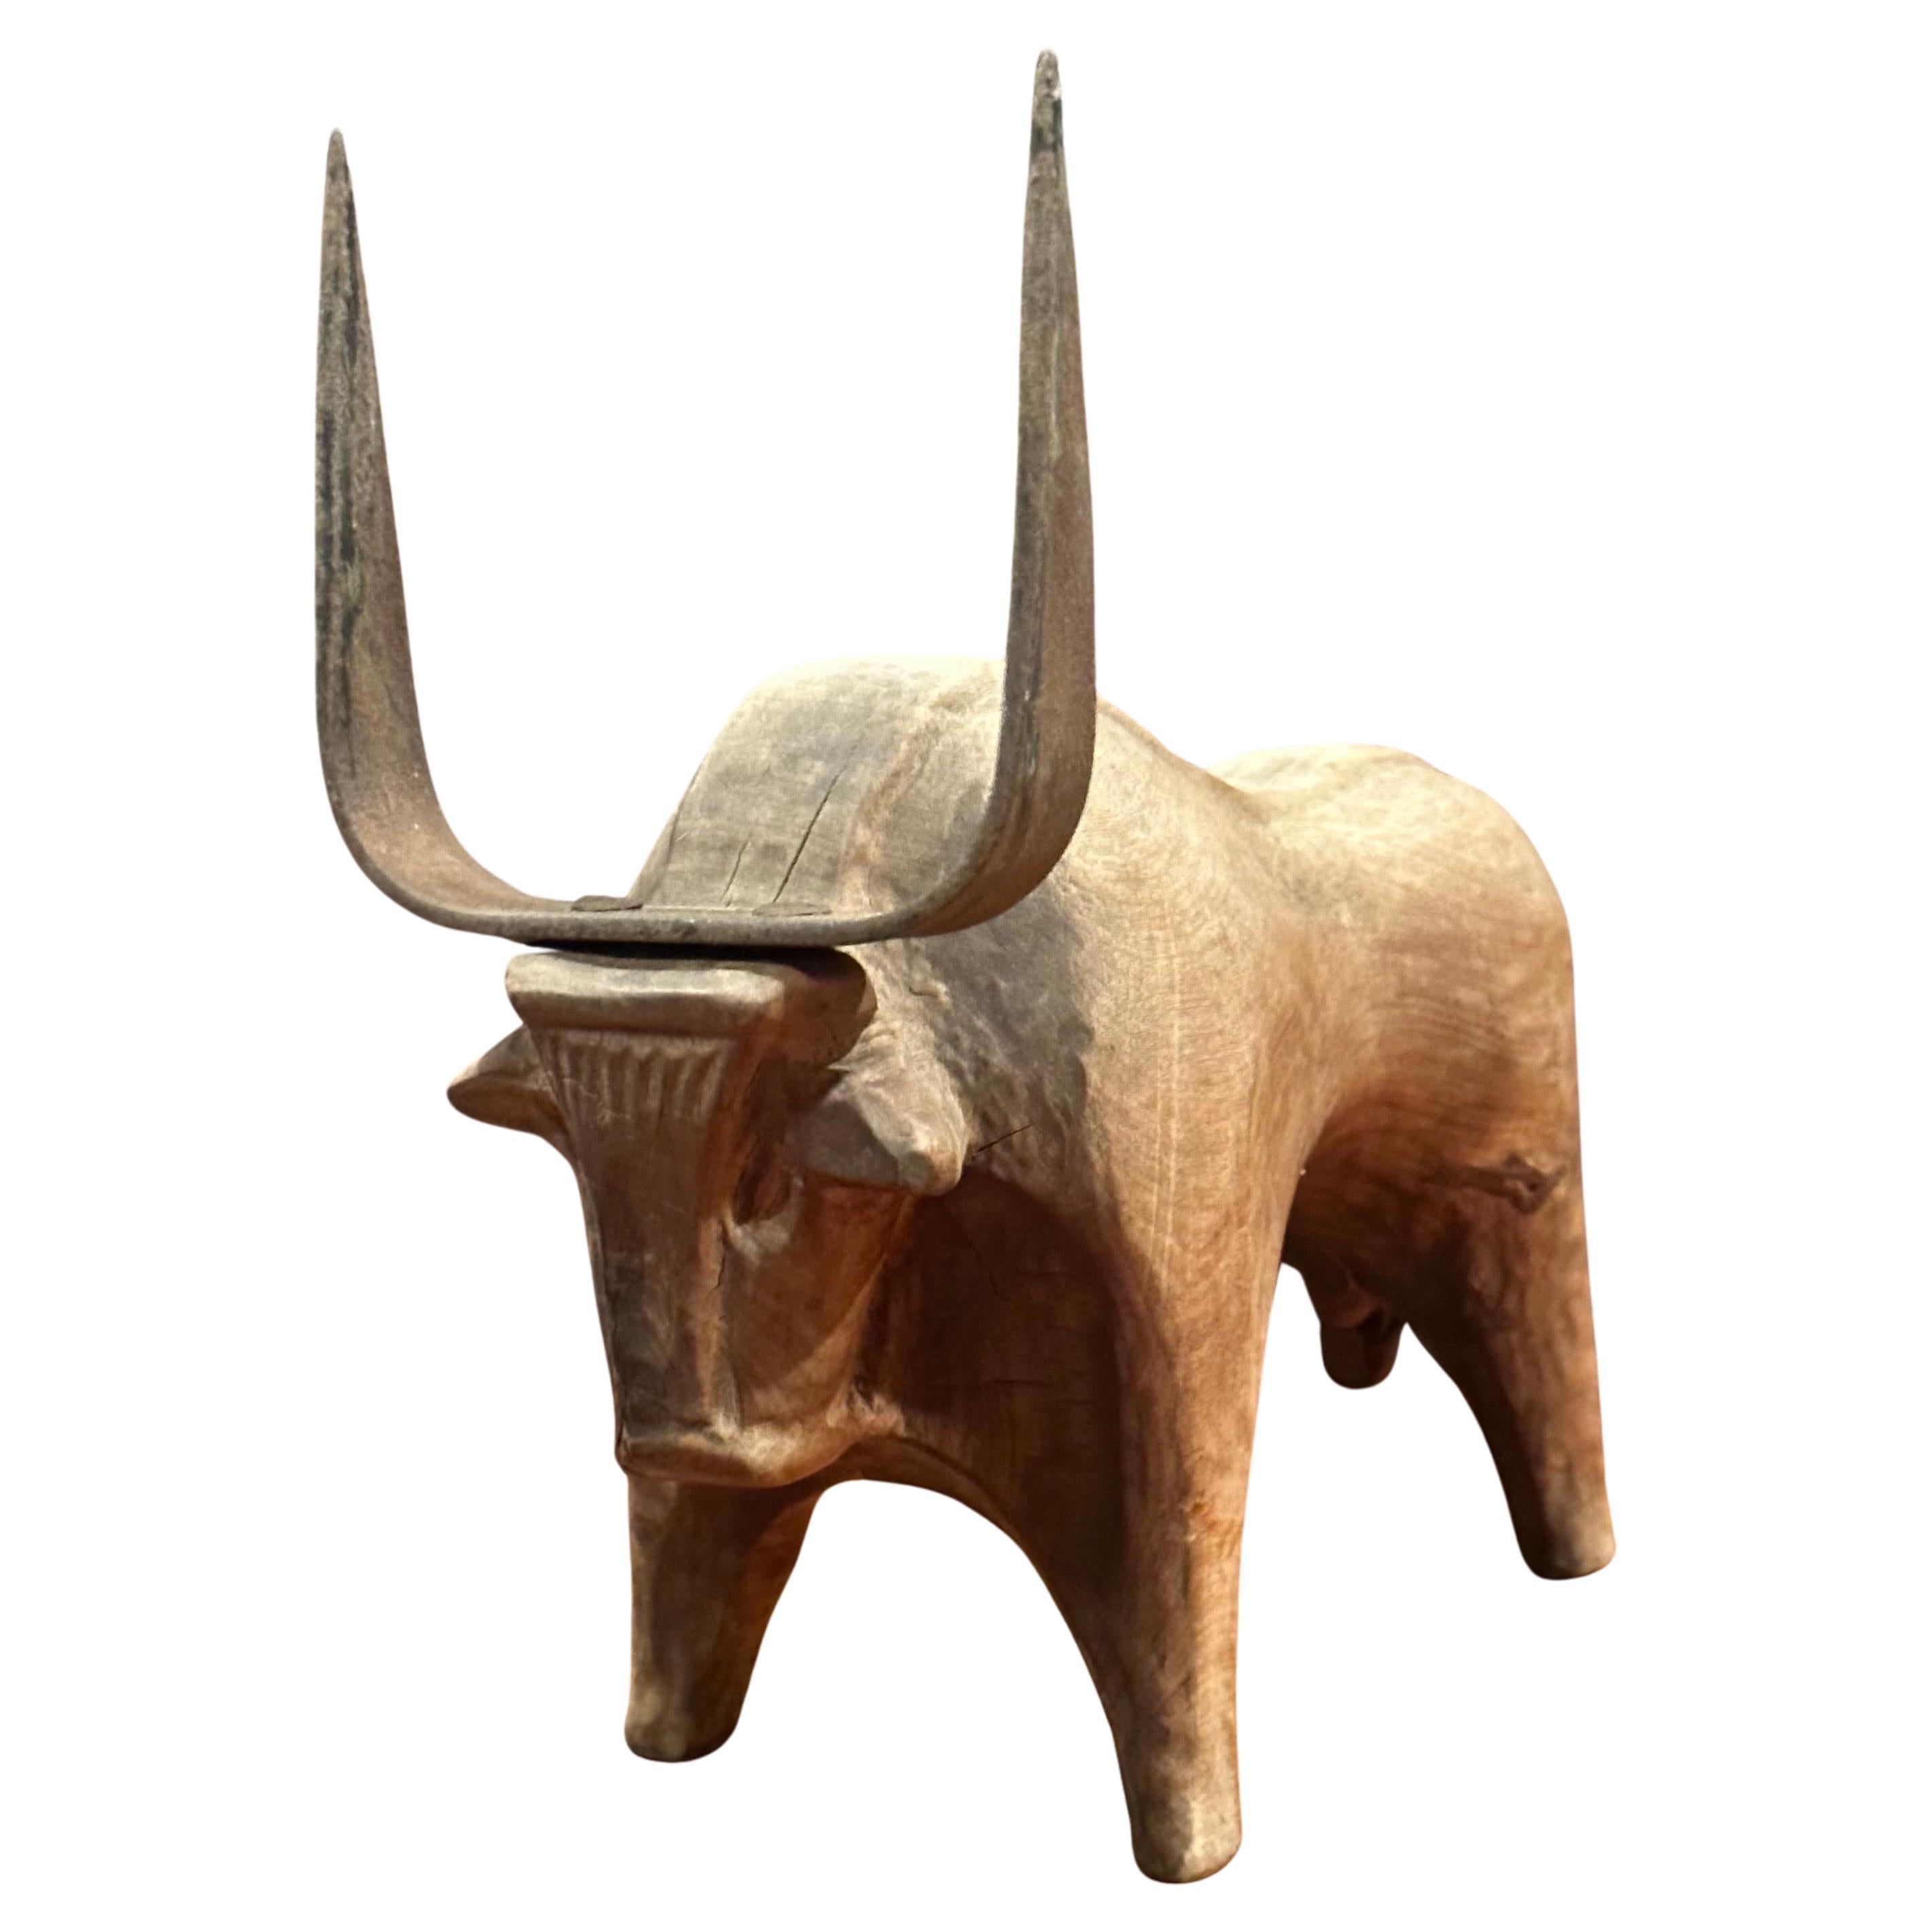 A very cool stylized carved wood and iron charging bull sculpture from Spain, circa 1970s. The piece is in good rustic condition and measures 4.5